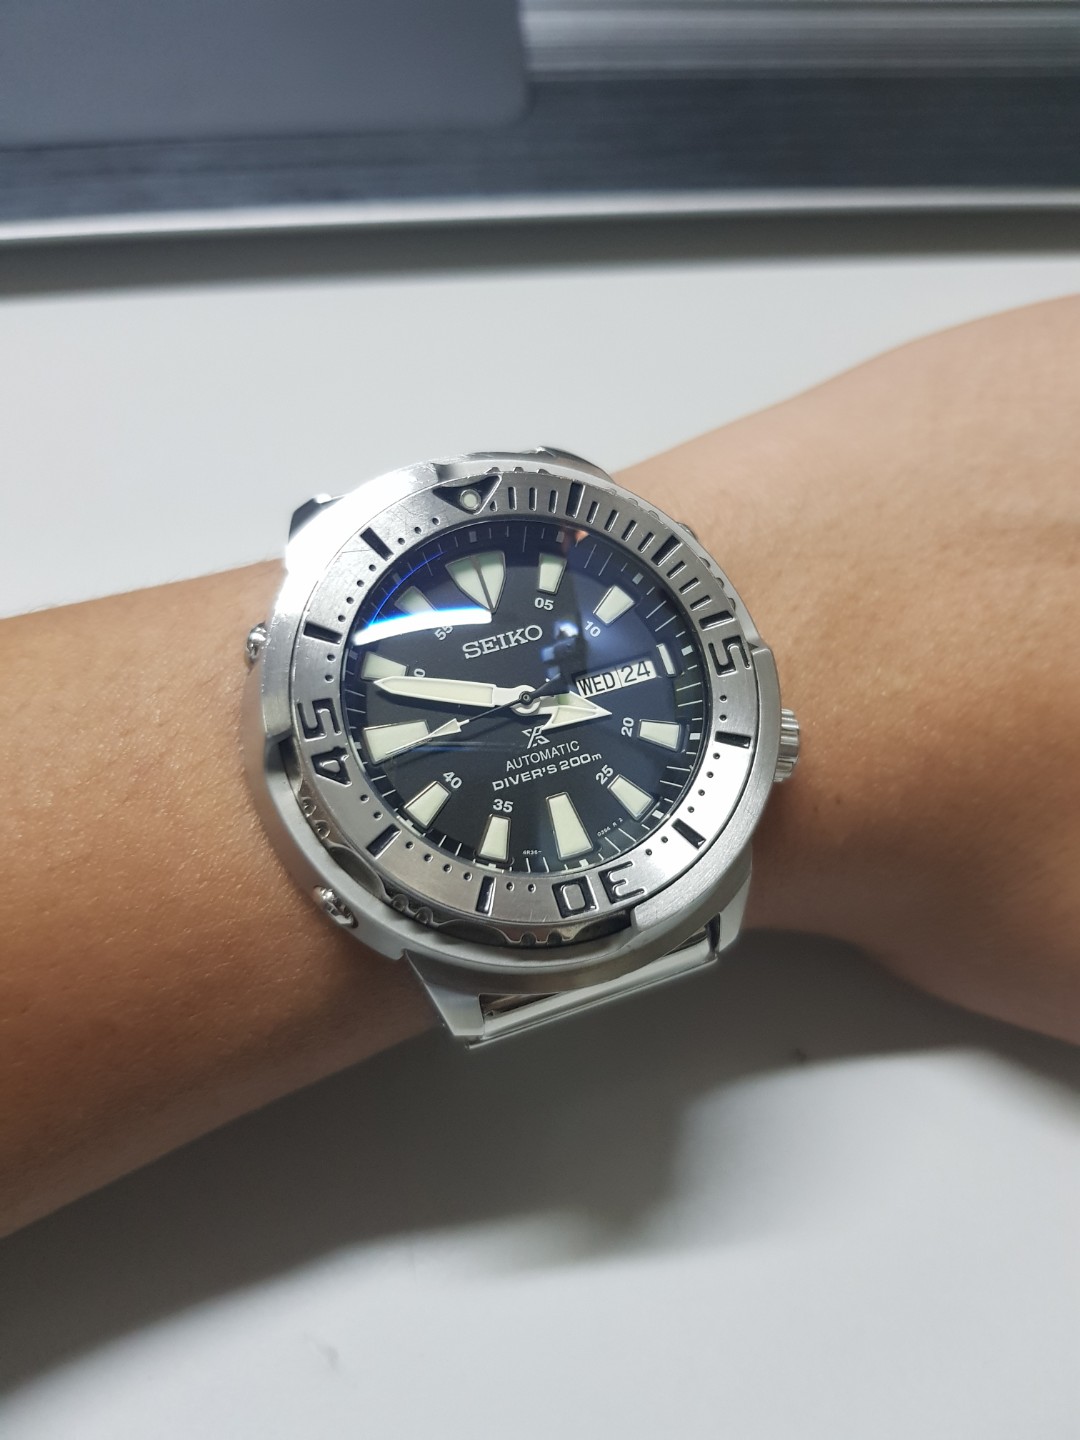 SEIKO SRP637K1 SRP637 PROSPEX DIVER WATCH W SAPPHIRE CRYSTAL BABY TUNA  MONSTER, Men's Fashion, Watches & Accessories, Watches on Carousell